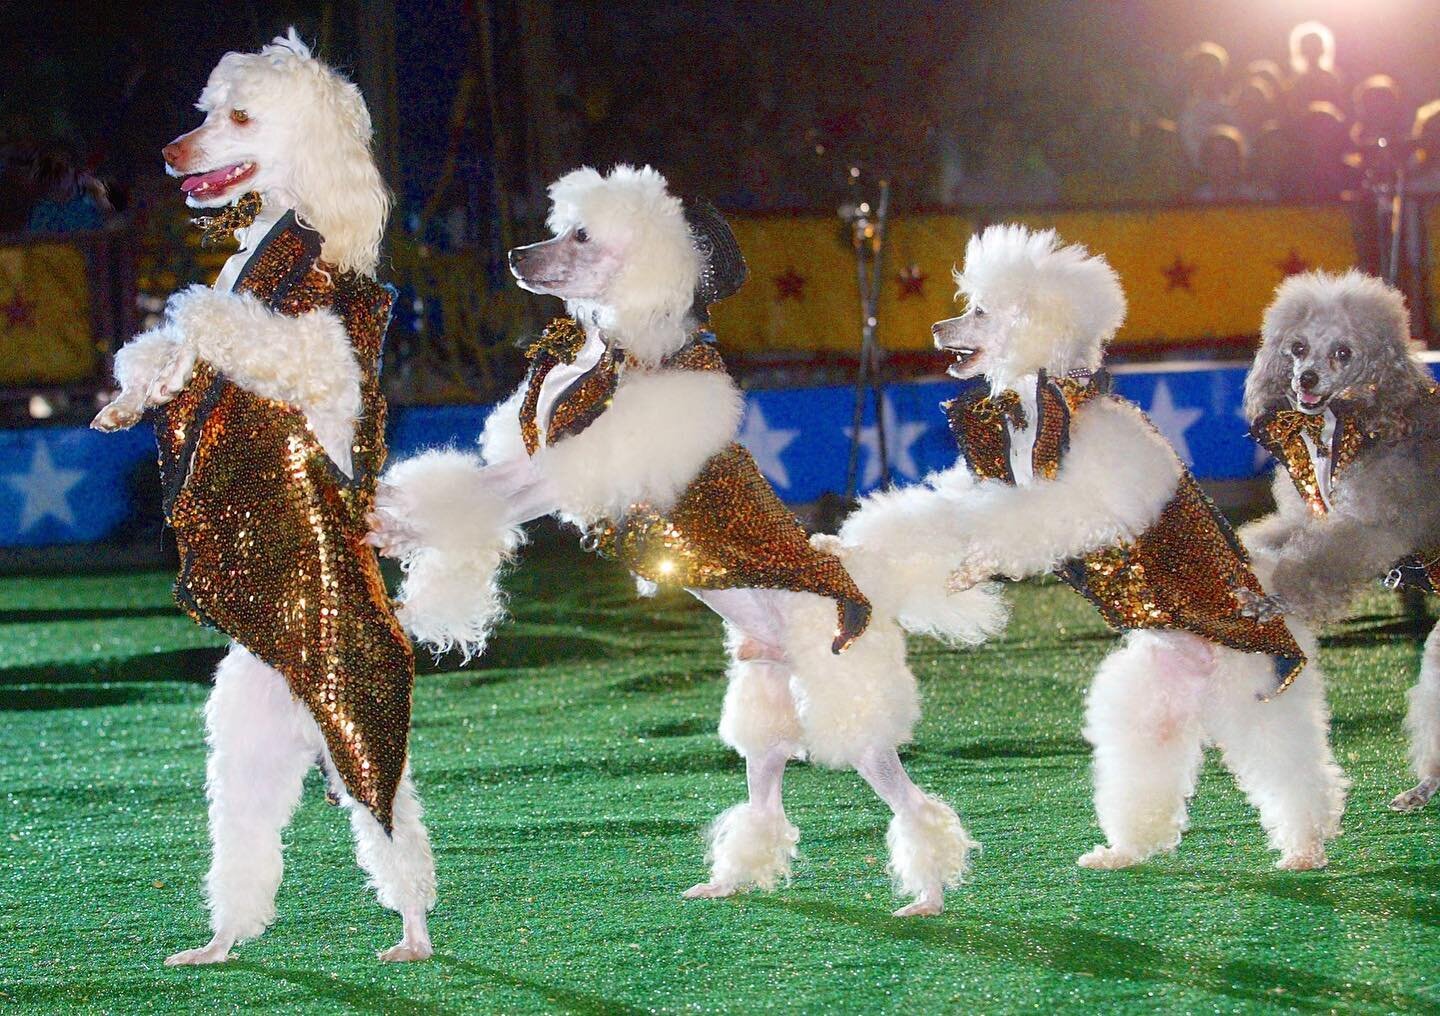 These Poodles are always dressed to impress 😍